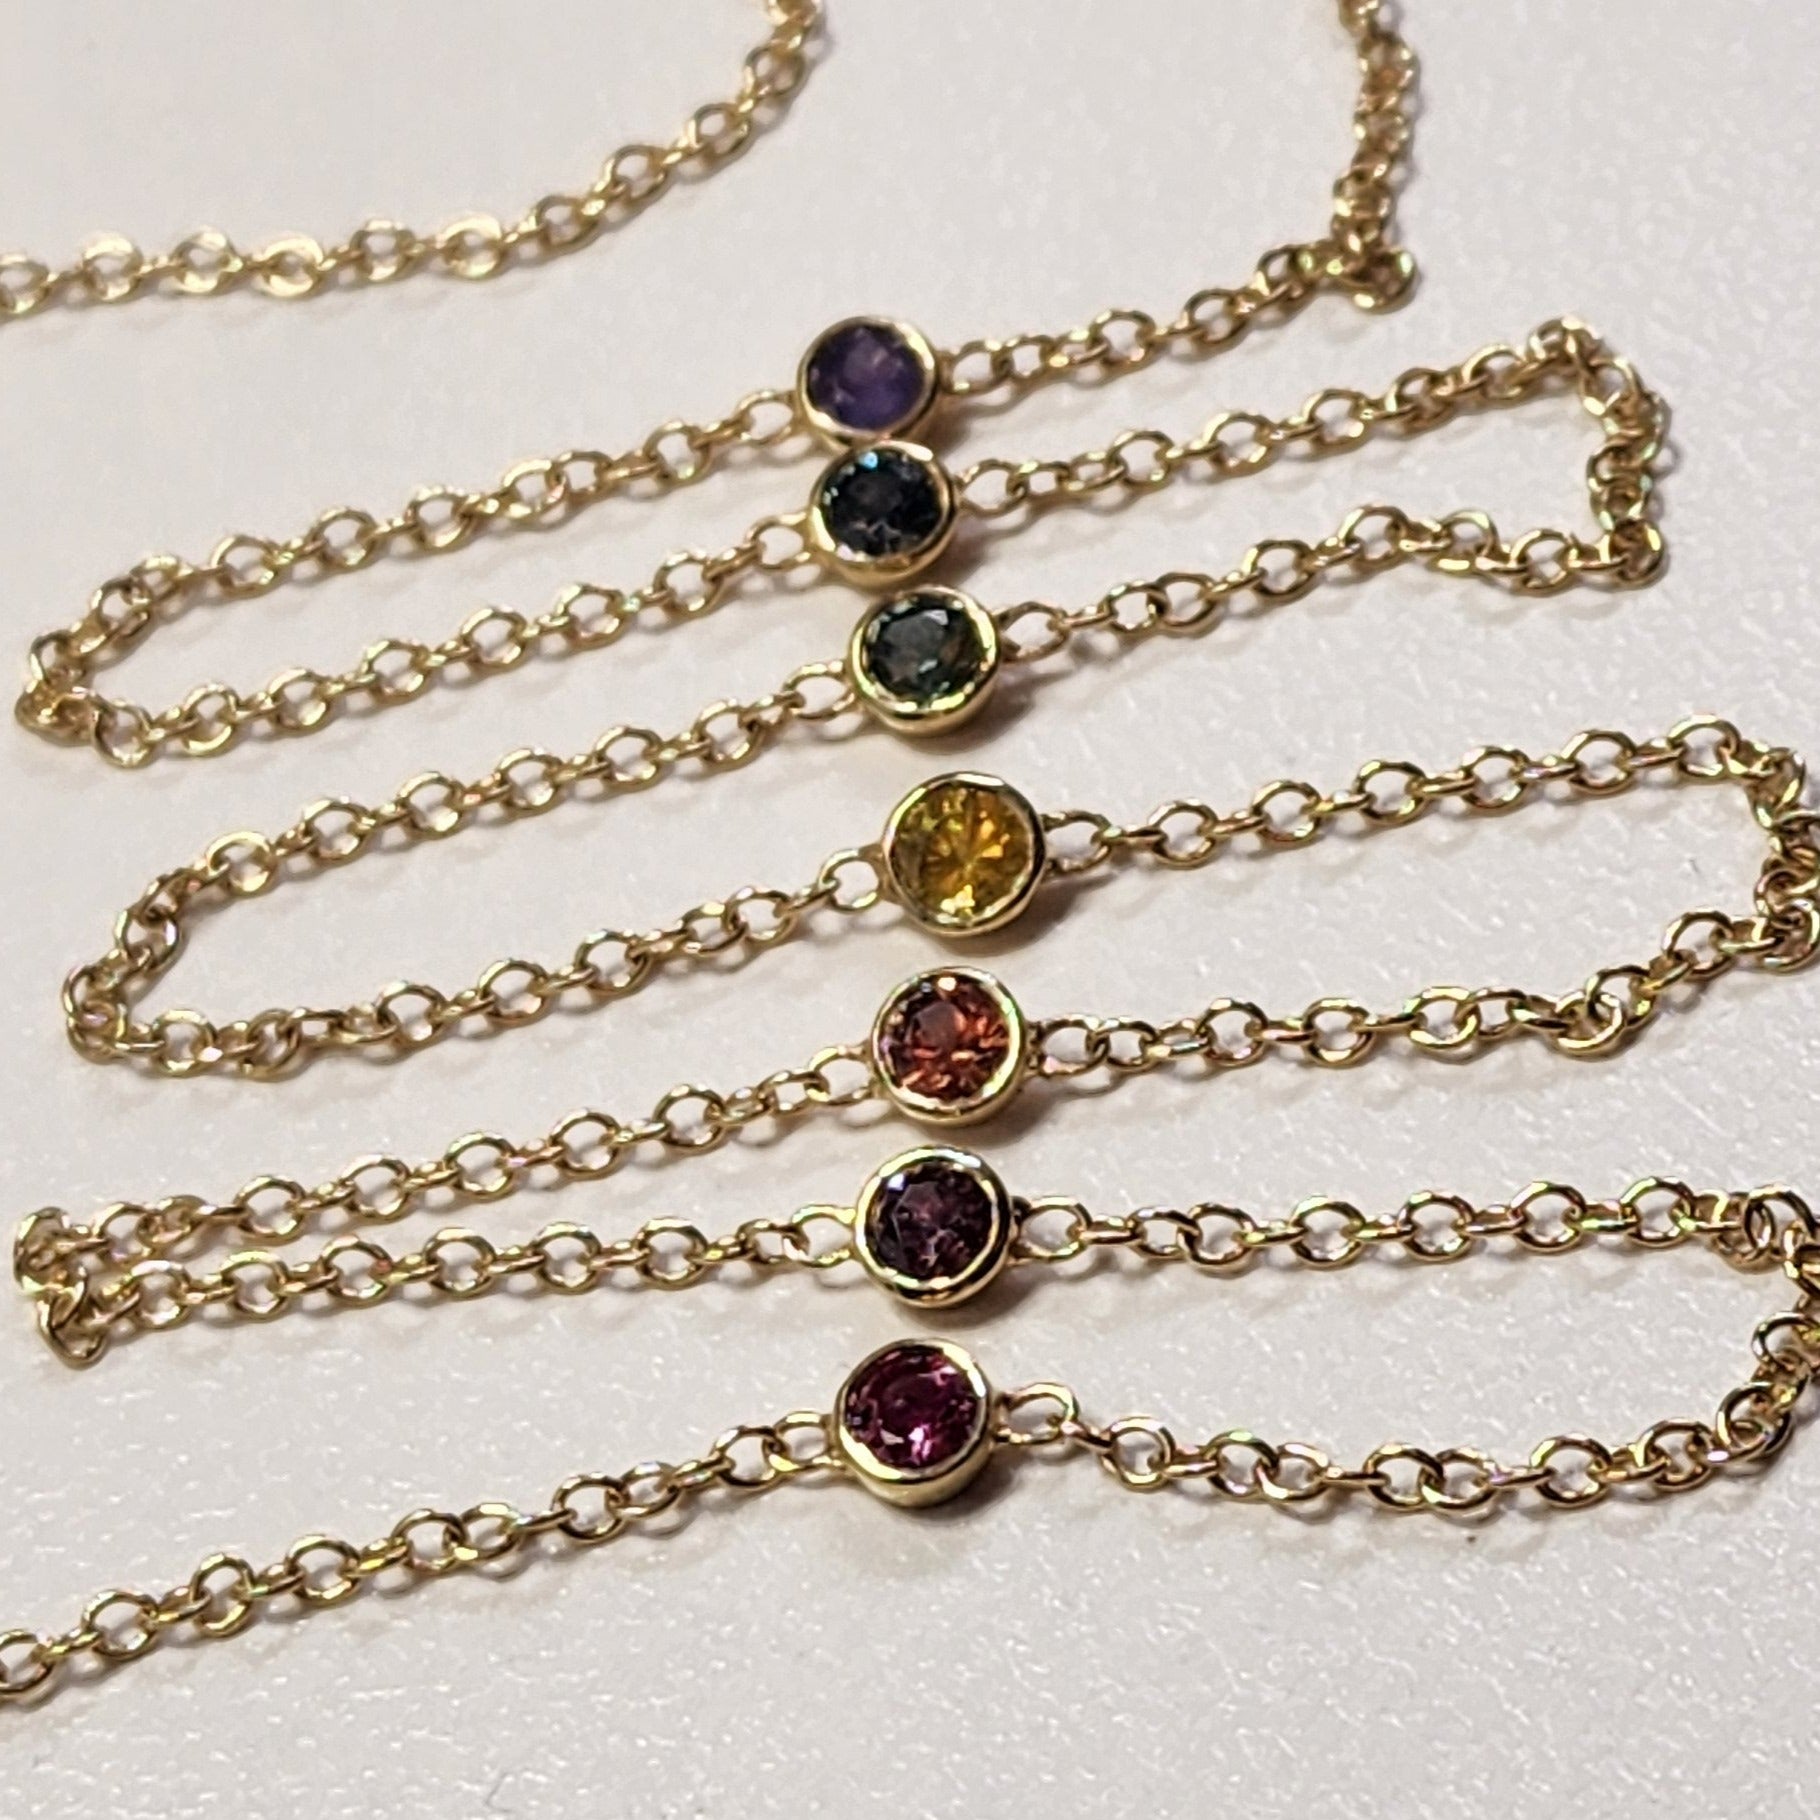 Necklace - Montana Sapphire .88 CTW 7 Rainbow Colored Rounds Bezel Mounted in 14K Yellow Gold